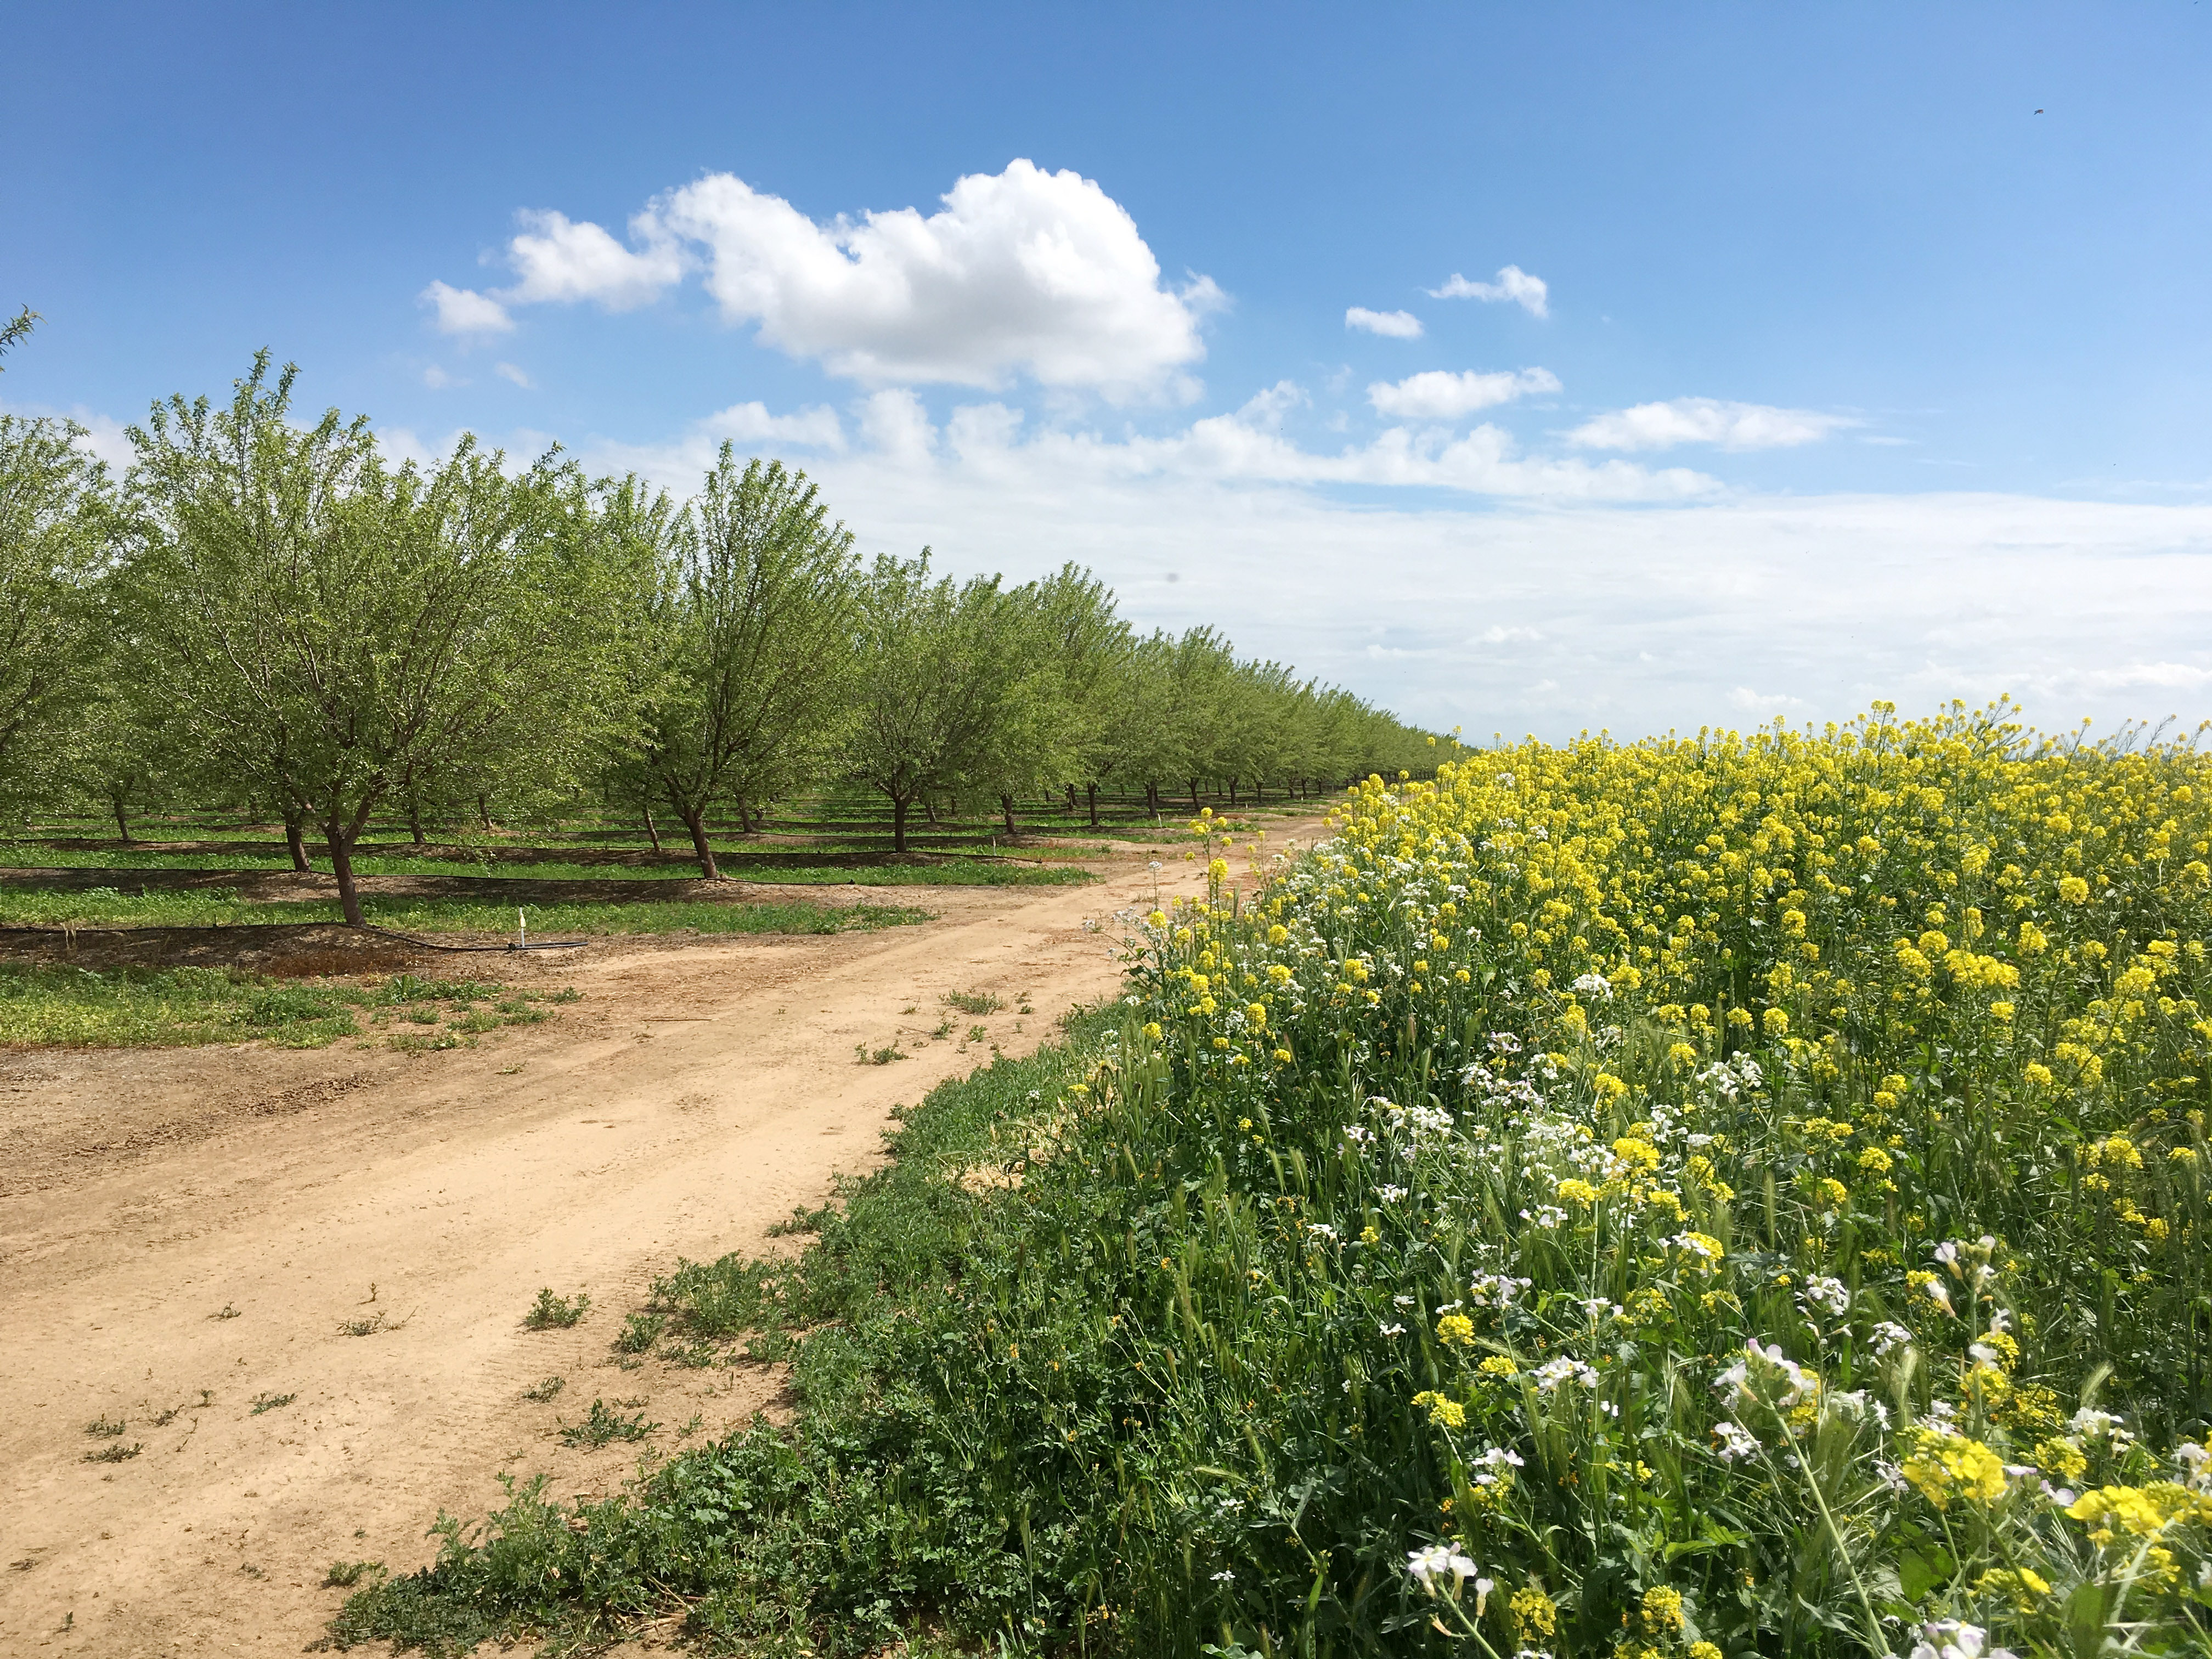 In this landscape image, rows of green, leafy trees are on the left, and on the right are blossoming cover crops of various colors. There is also blue sky and puffy clouds to round out this idyllic scene.